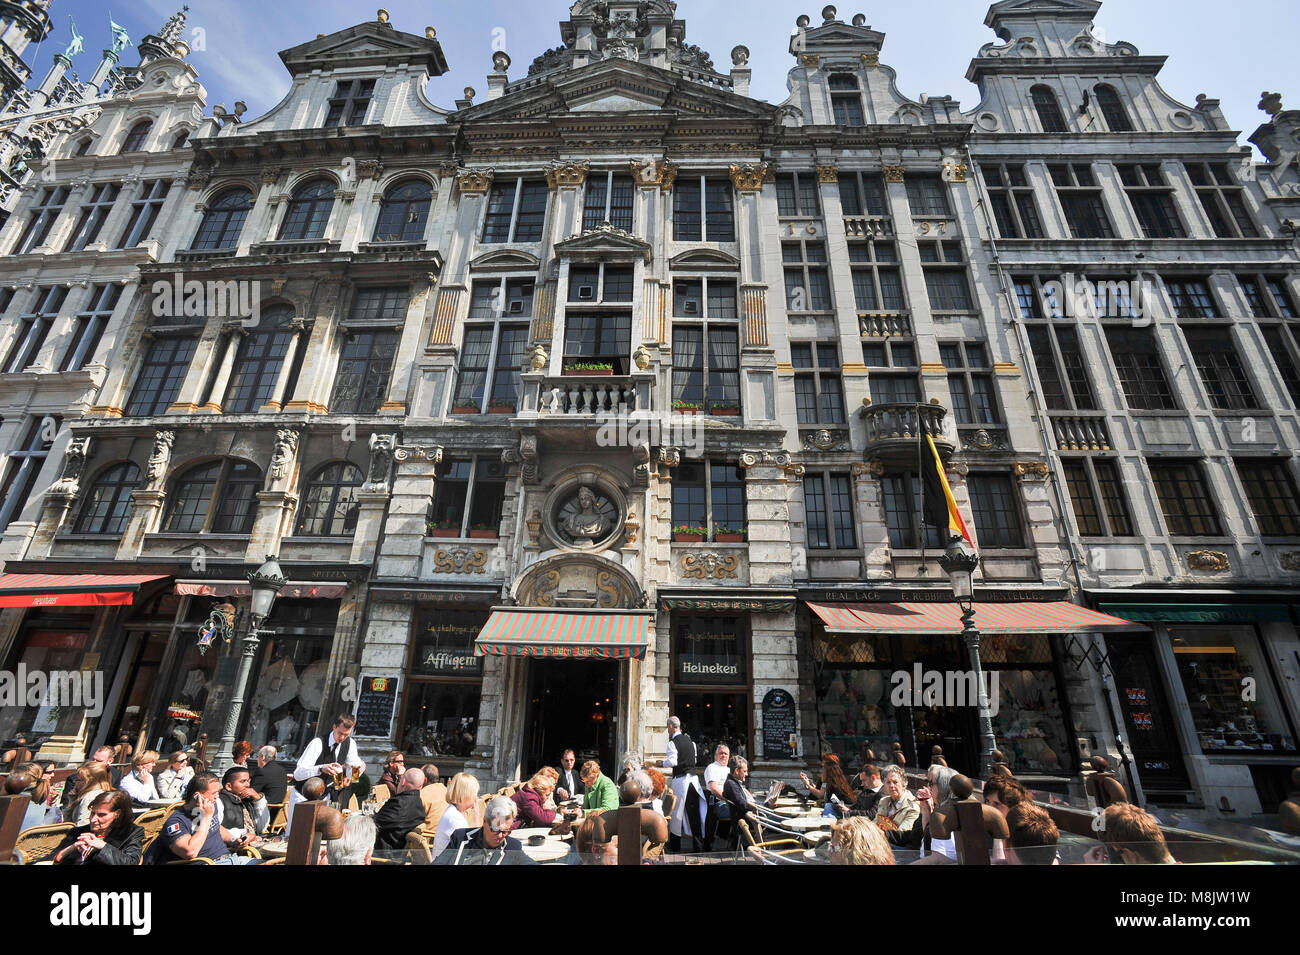 Italian Baroque houses Le Cerf, Joseph et Anne, L'Ange, La Chaloupe d'or, Le Pigeon and Le Marchand d'or from XVII century on Grand Place (Grand Squar Stock Photo